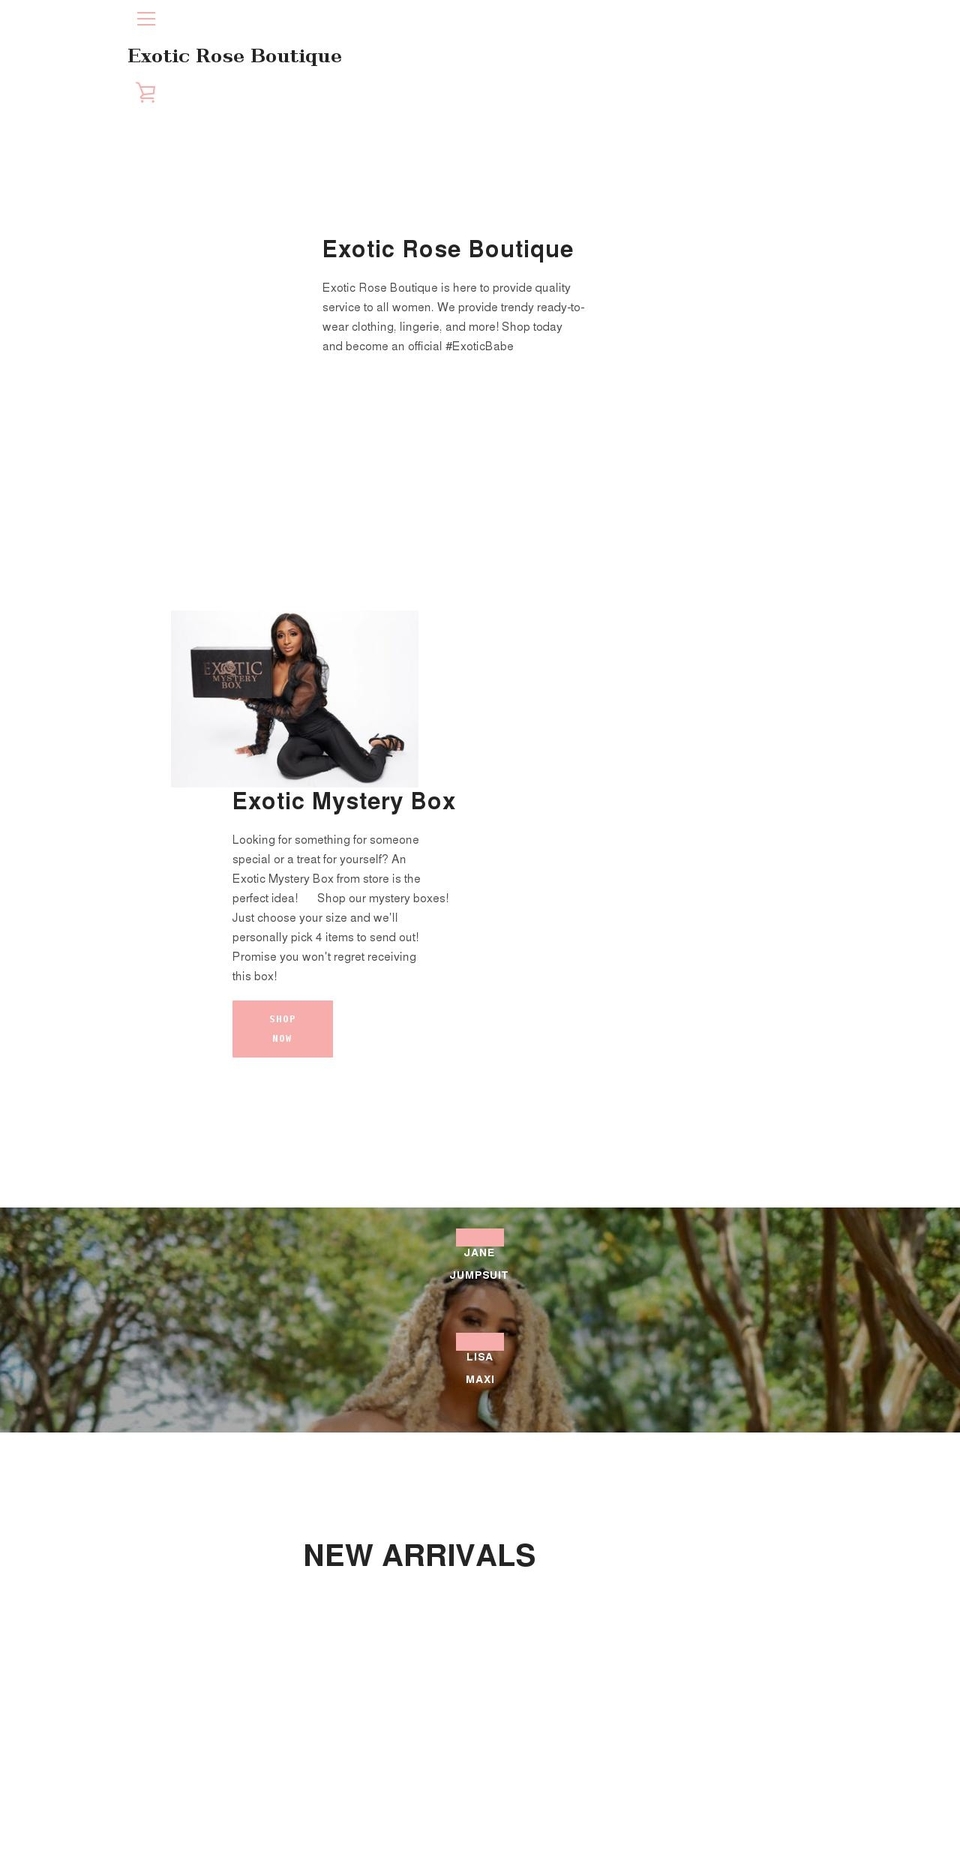 Narrative with Installments message Shopify theme site example exoticroseboutique.com